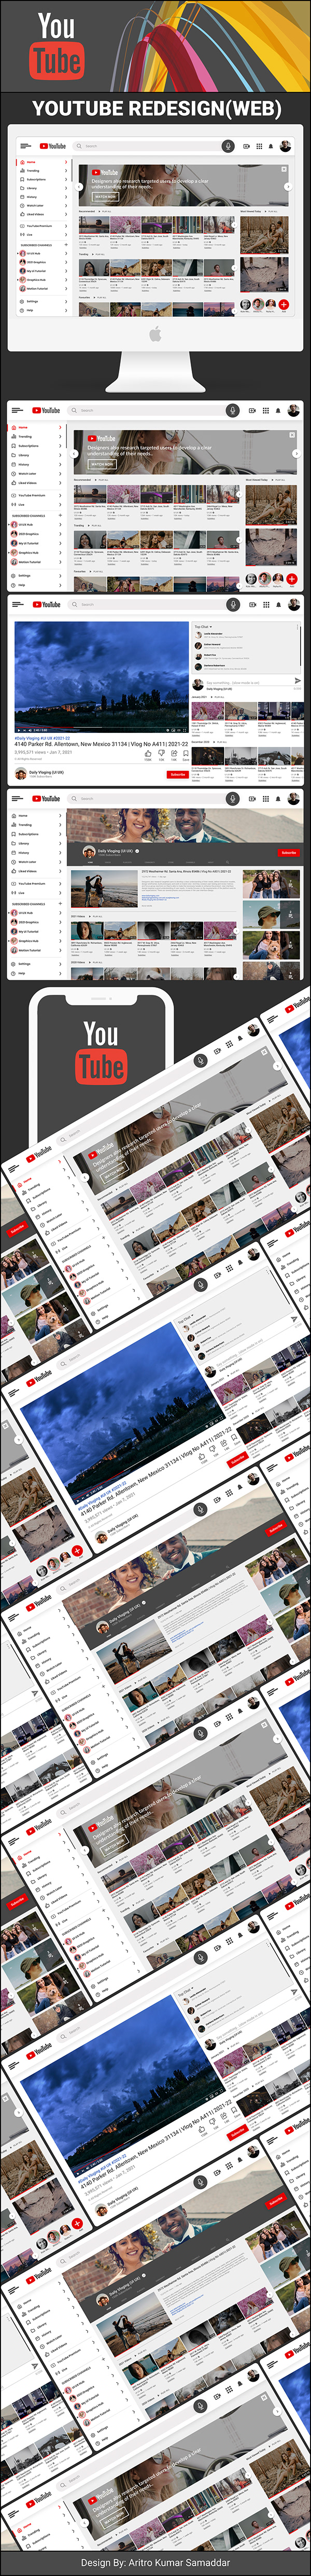 YOUTUBE(WEB) - REDESIGN CONCEPT